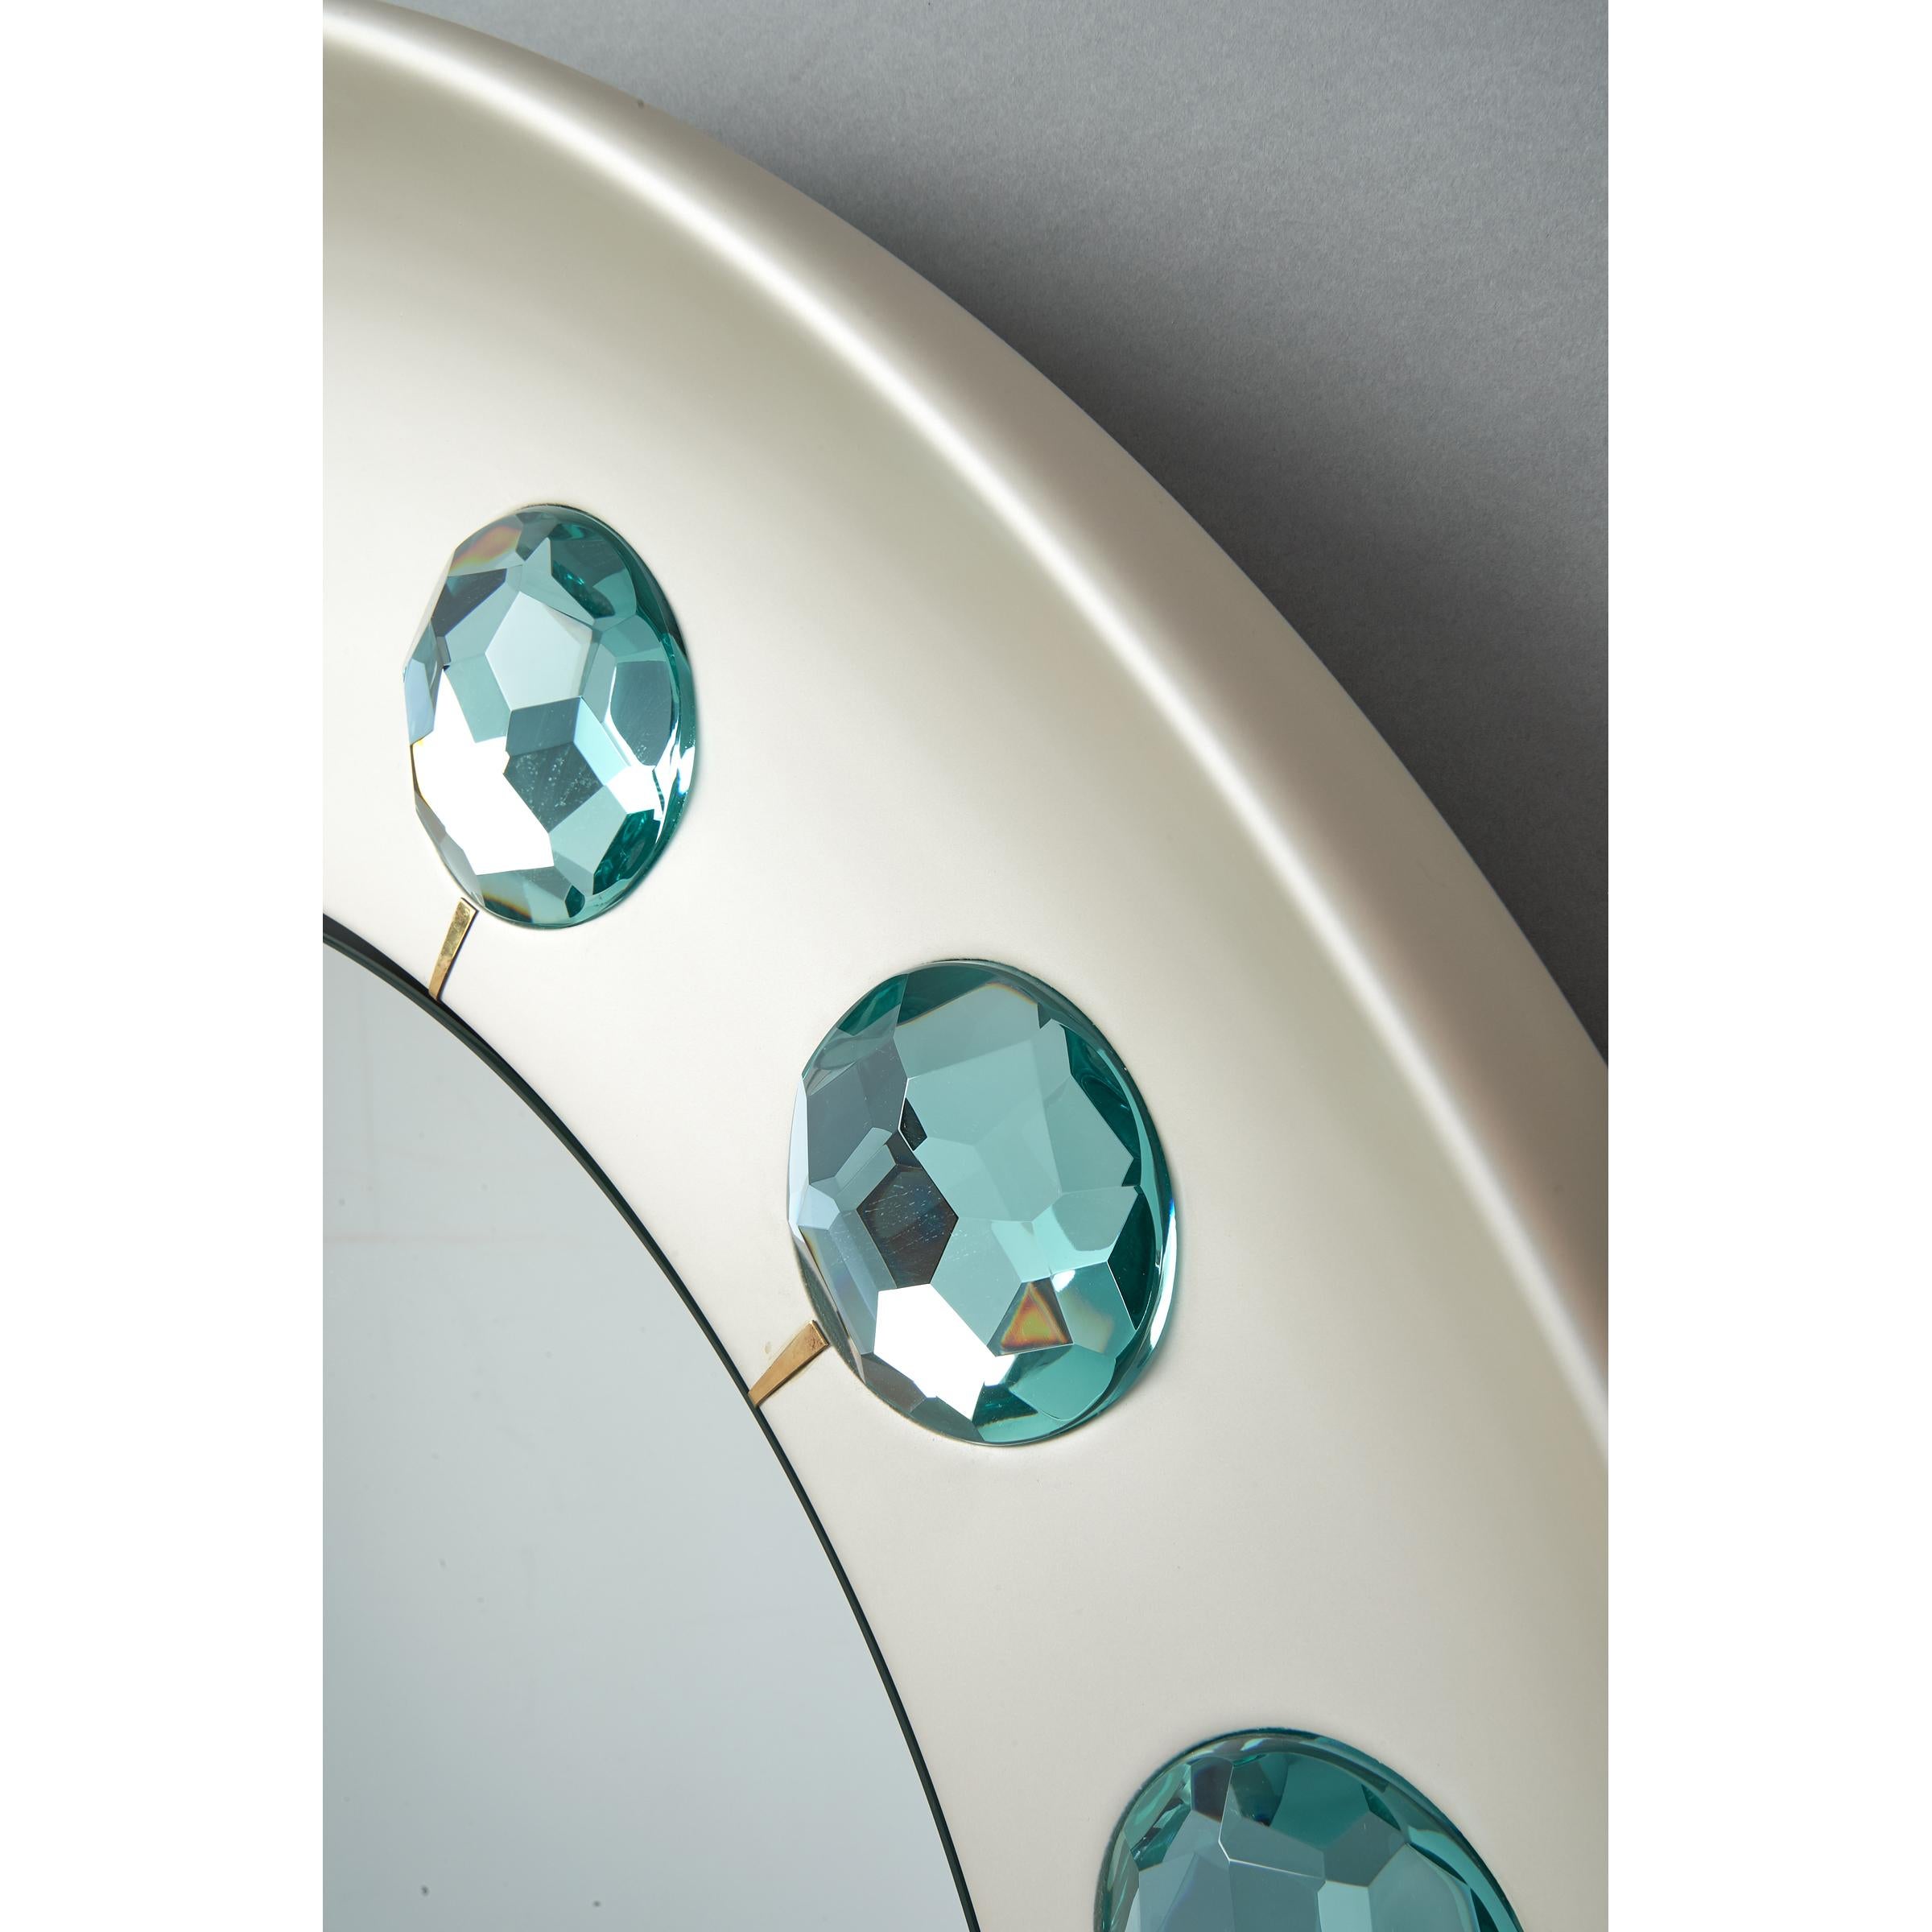 Modern Ghiro Studio Mirror with Faceted Diamond Cut Glass, Italy, 2019